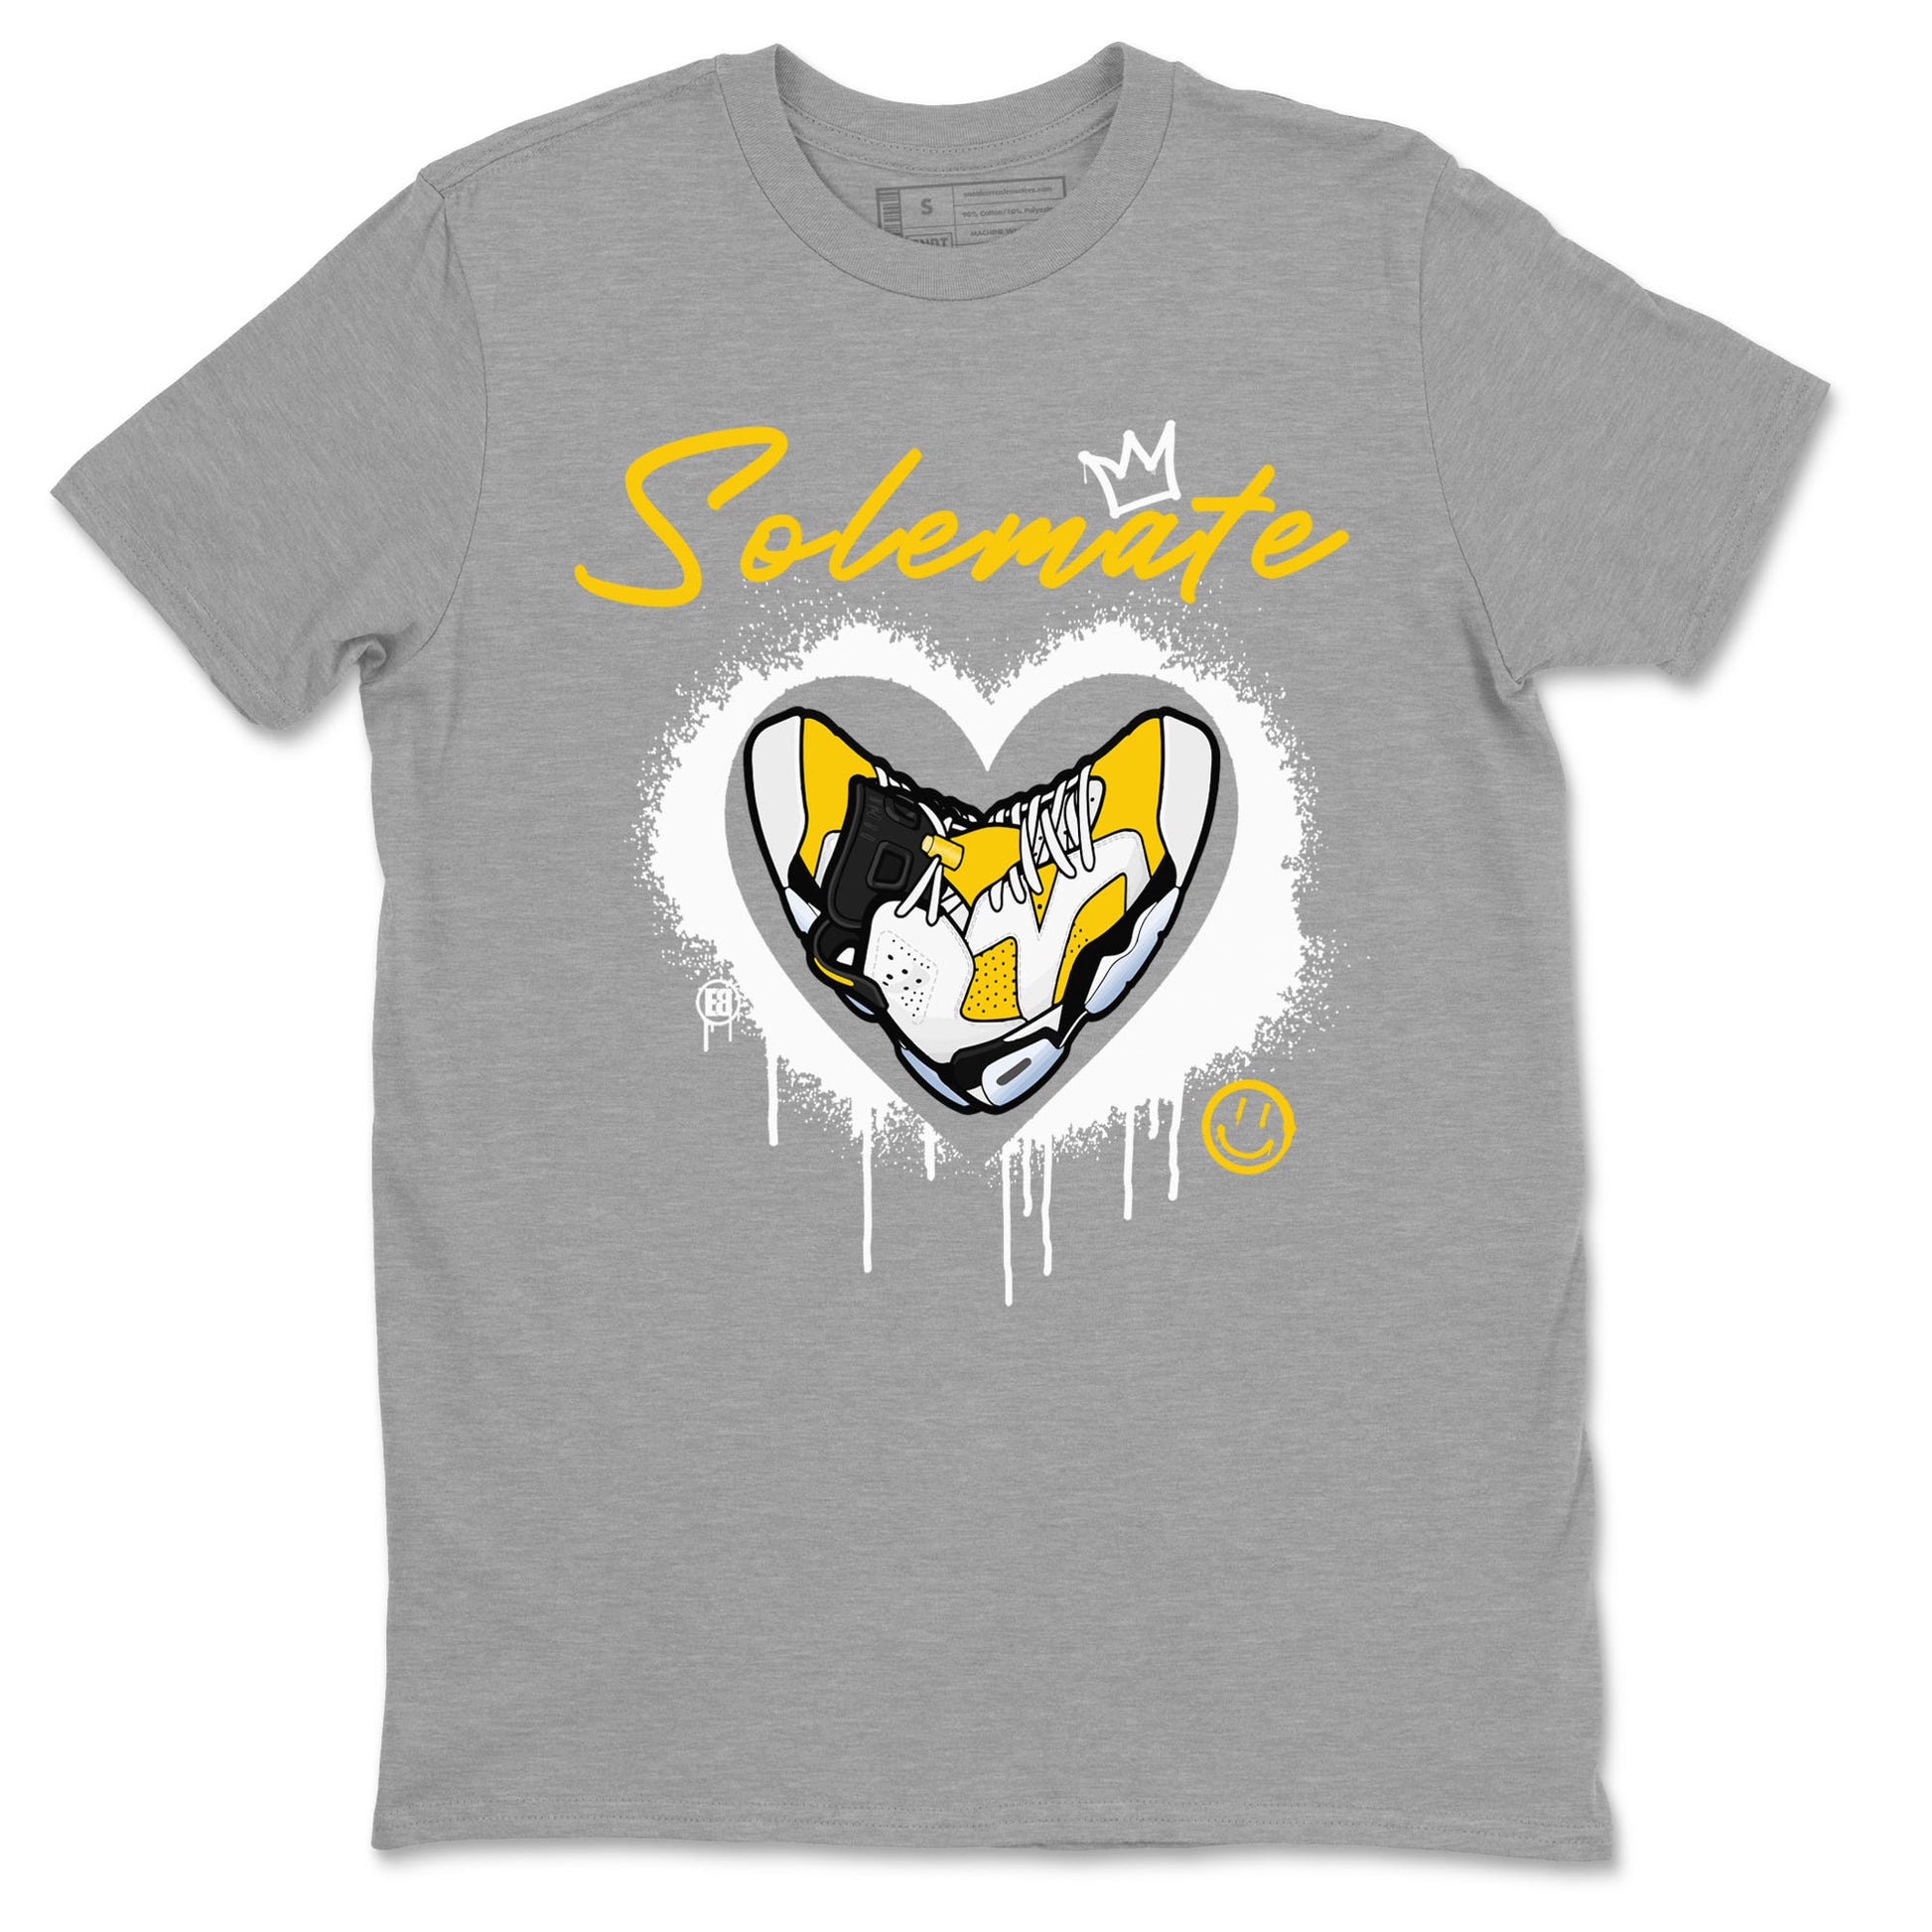 Solemate sneaker match tees to 6s Yellow Ochre street fashion brand for shirts to match Jordans SNRT Sneaker Tees Air Jordan 6 Yellow Ochre unisex t-shirt Heather Grey 2 unisex shirt